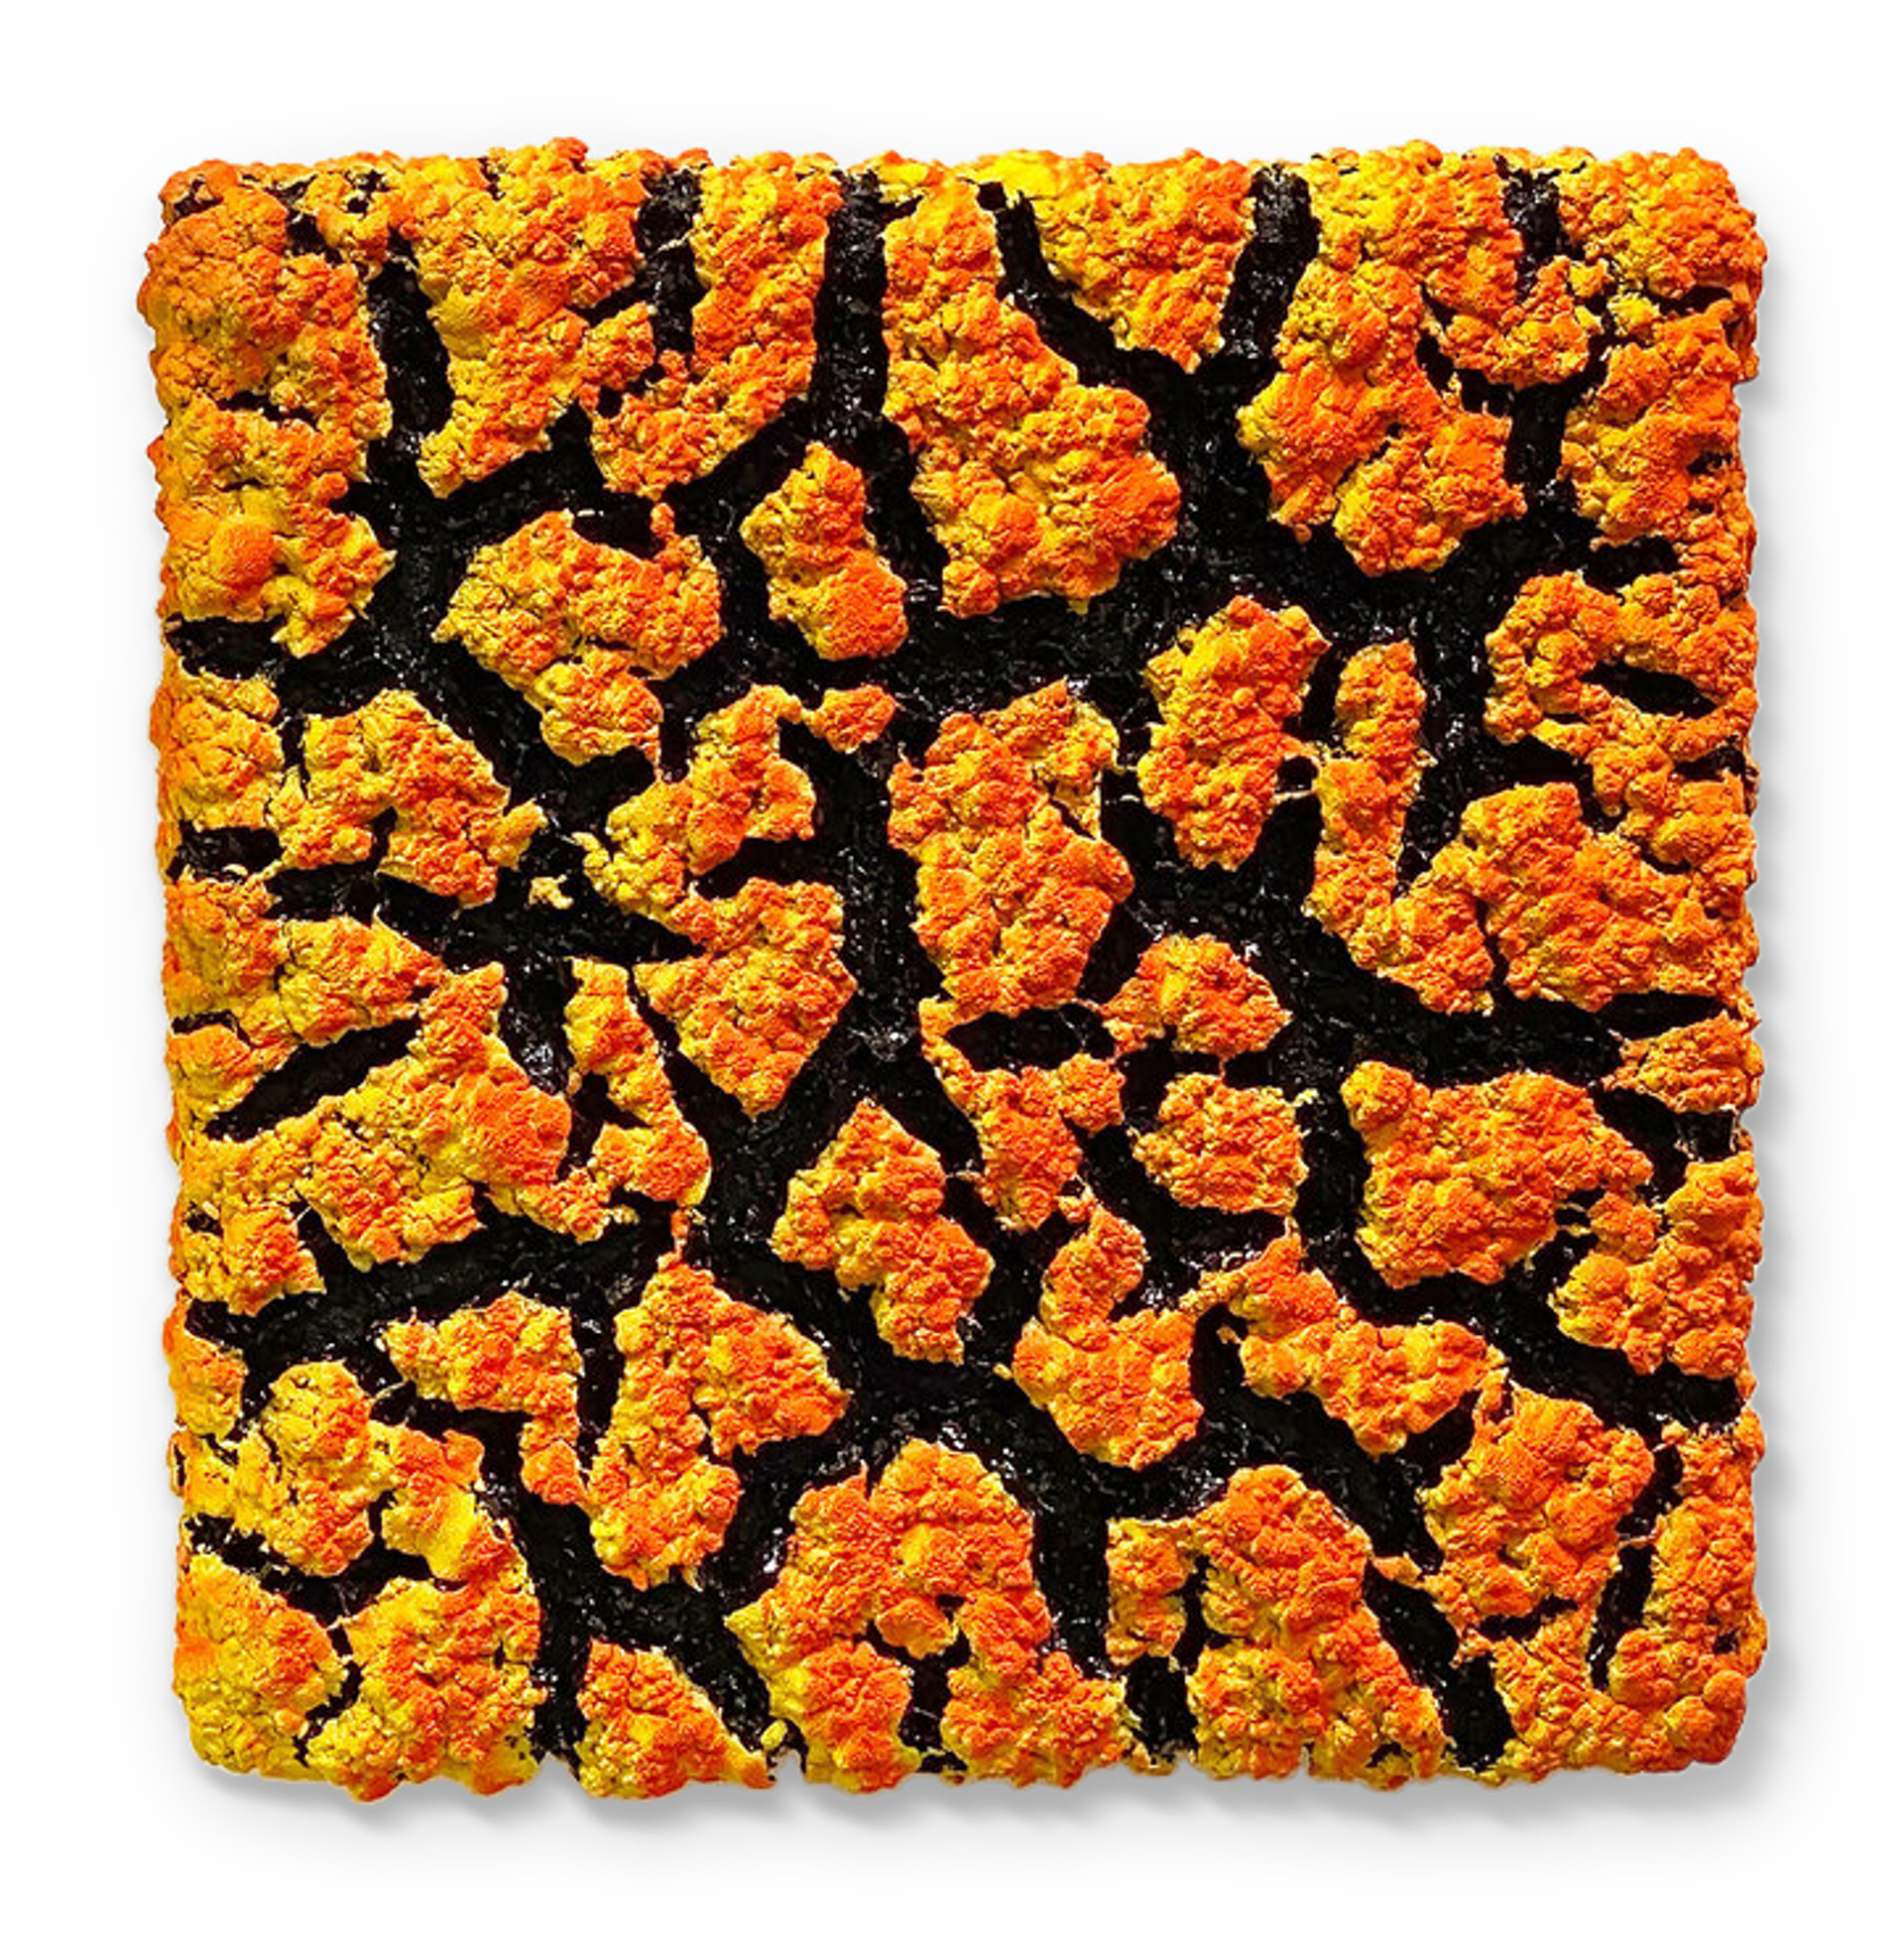 Yellow & Orange Lichen Wall Piece (Other colors can be ordered) by Randy O'Brien